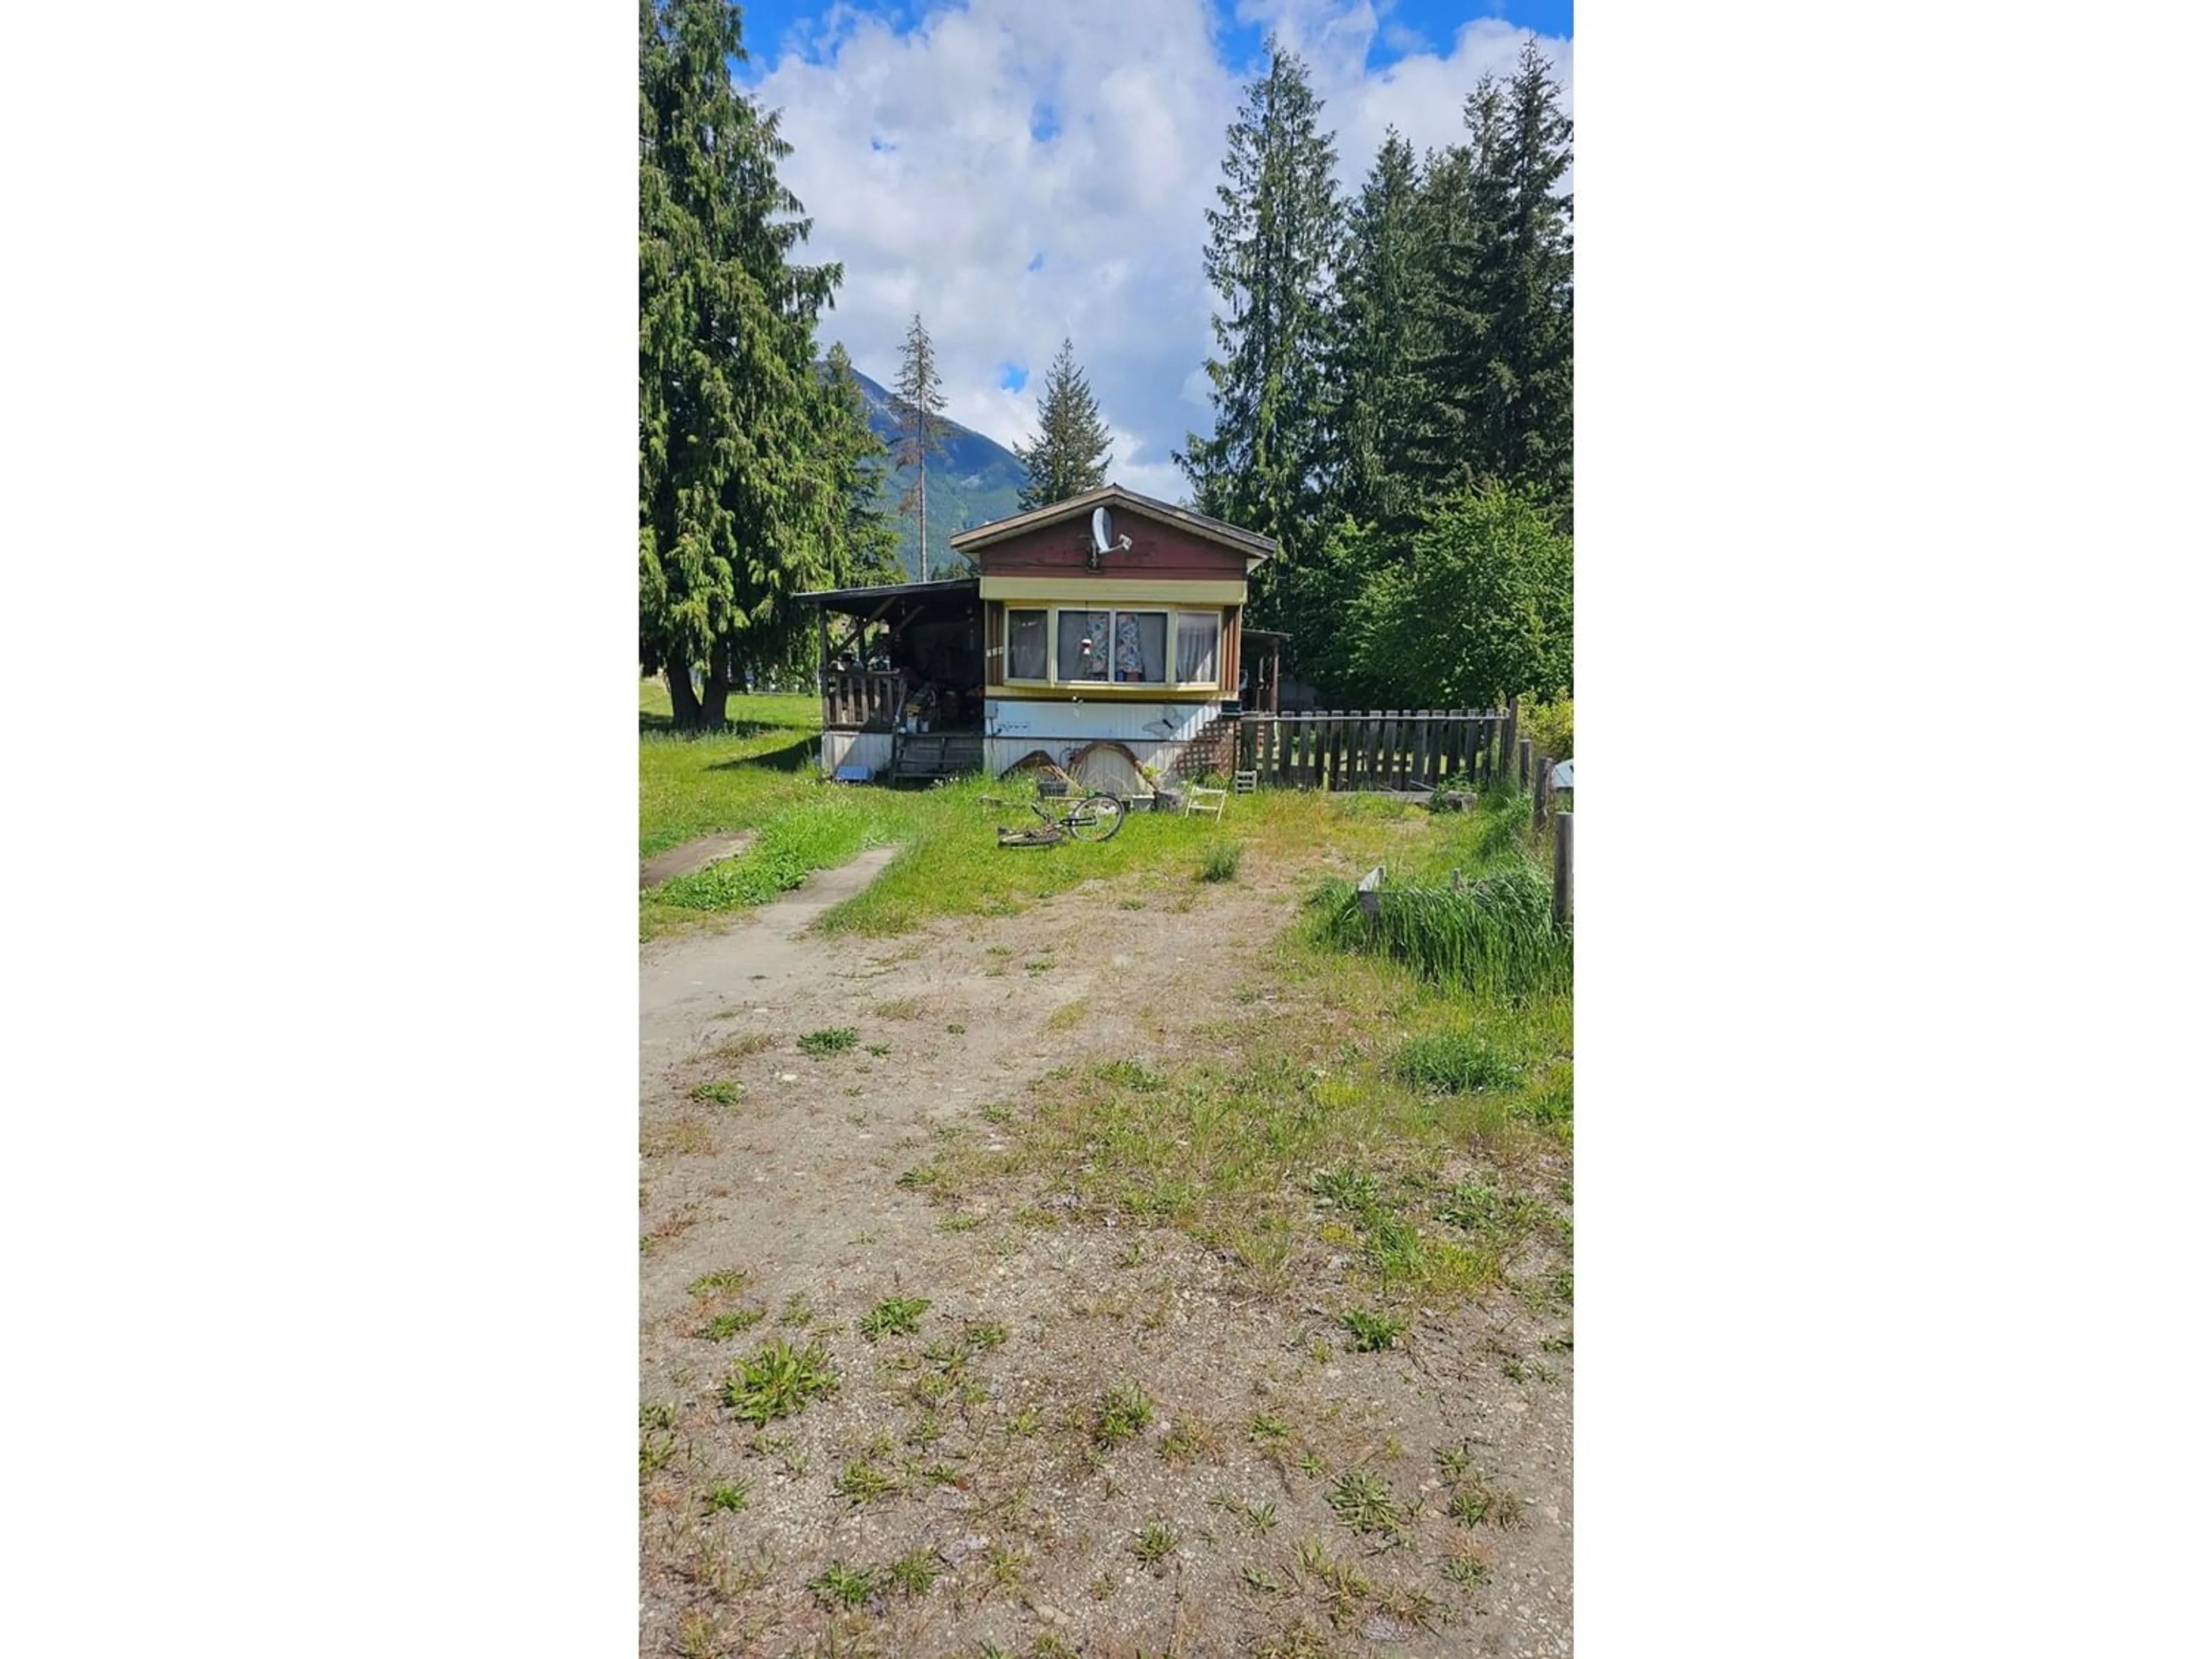 Frontside or backside of a home for 739 9TH AVENUE NW, Nakusp British Columbia V0G1R0